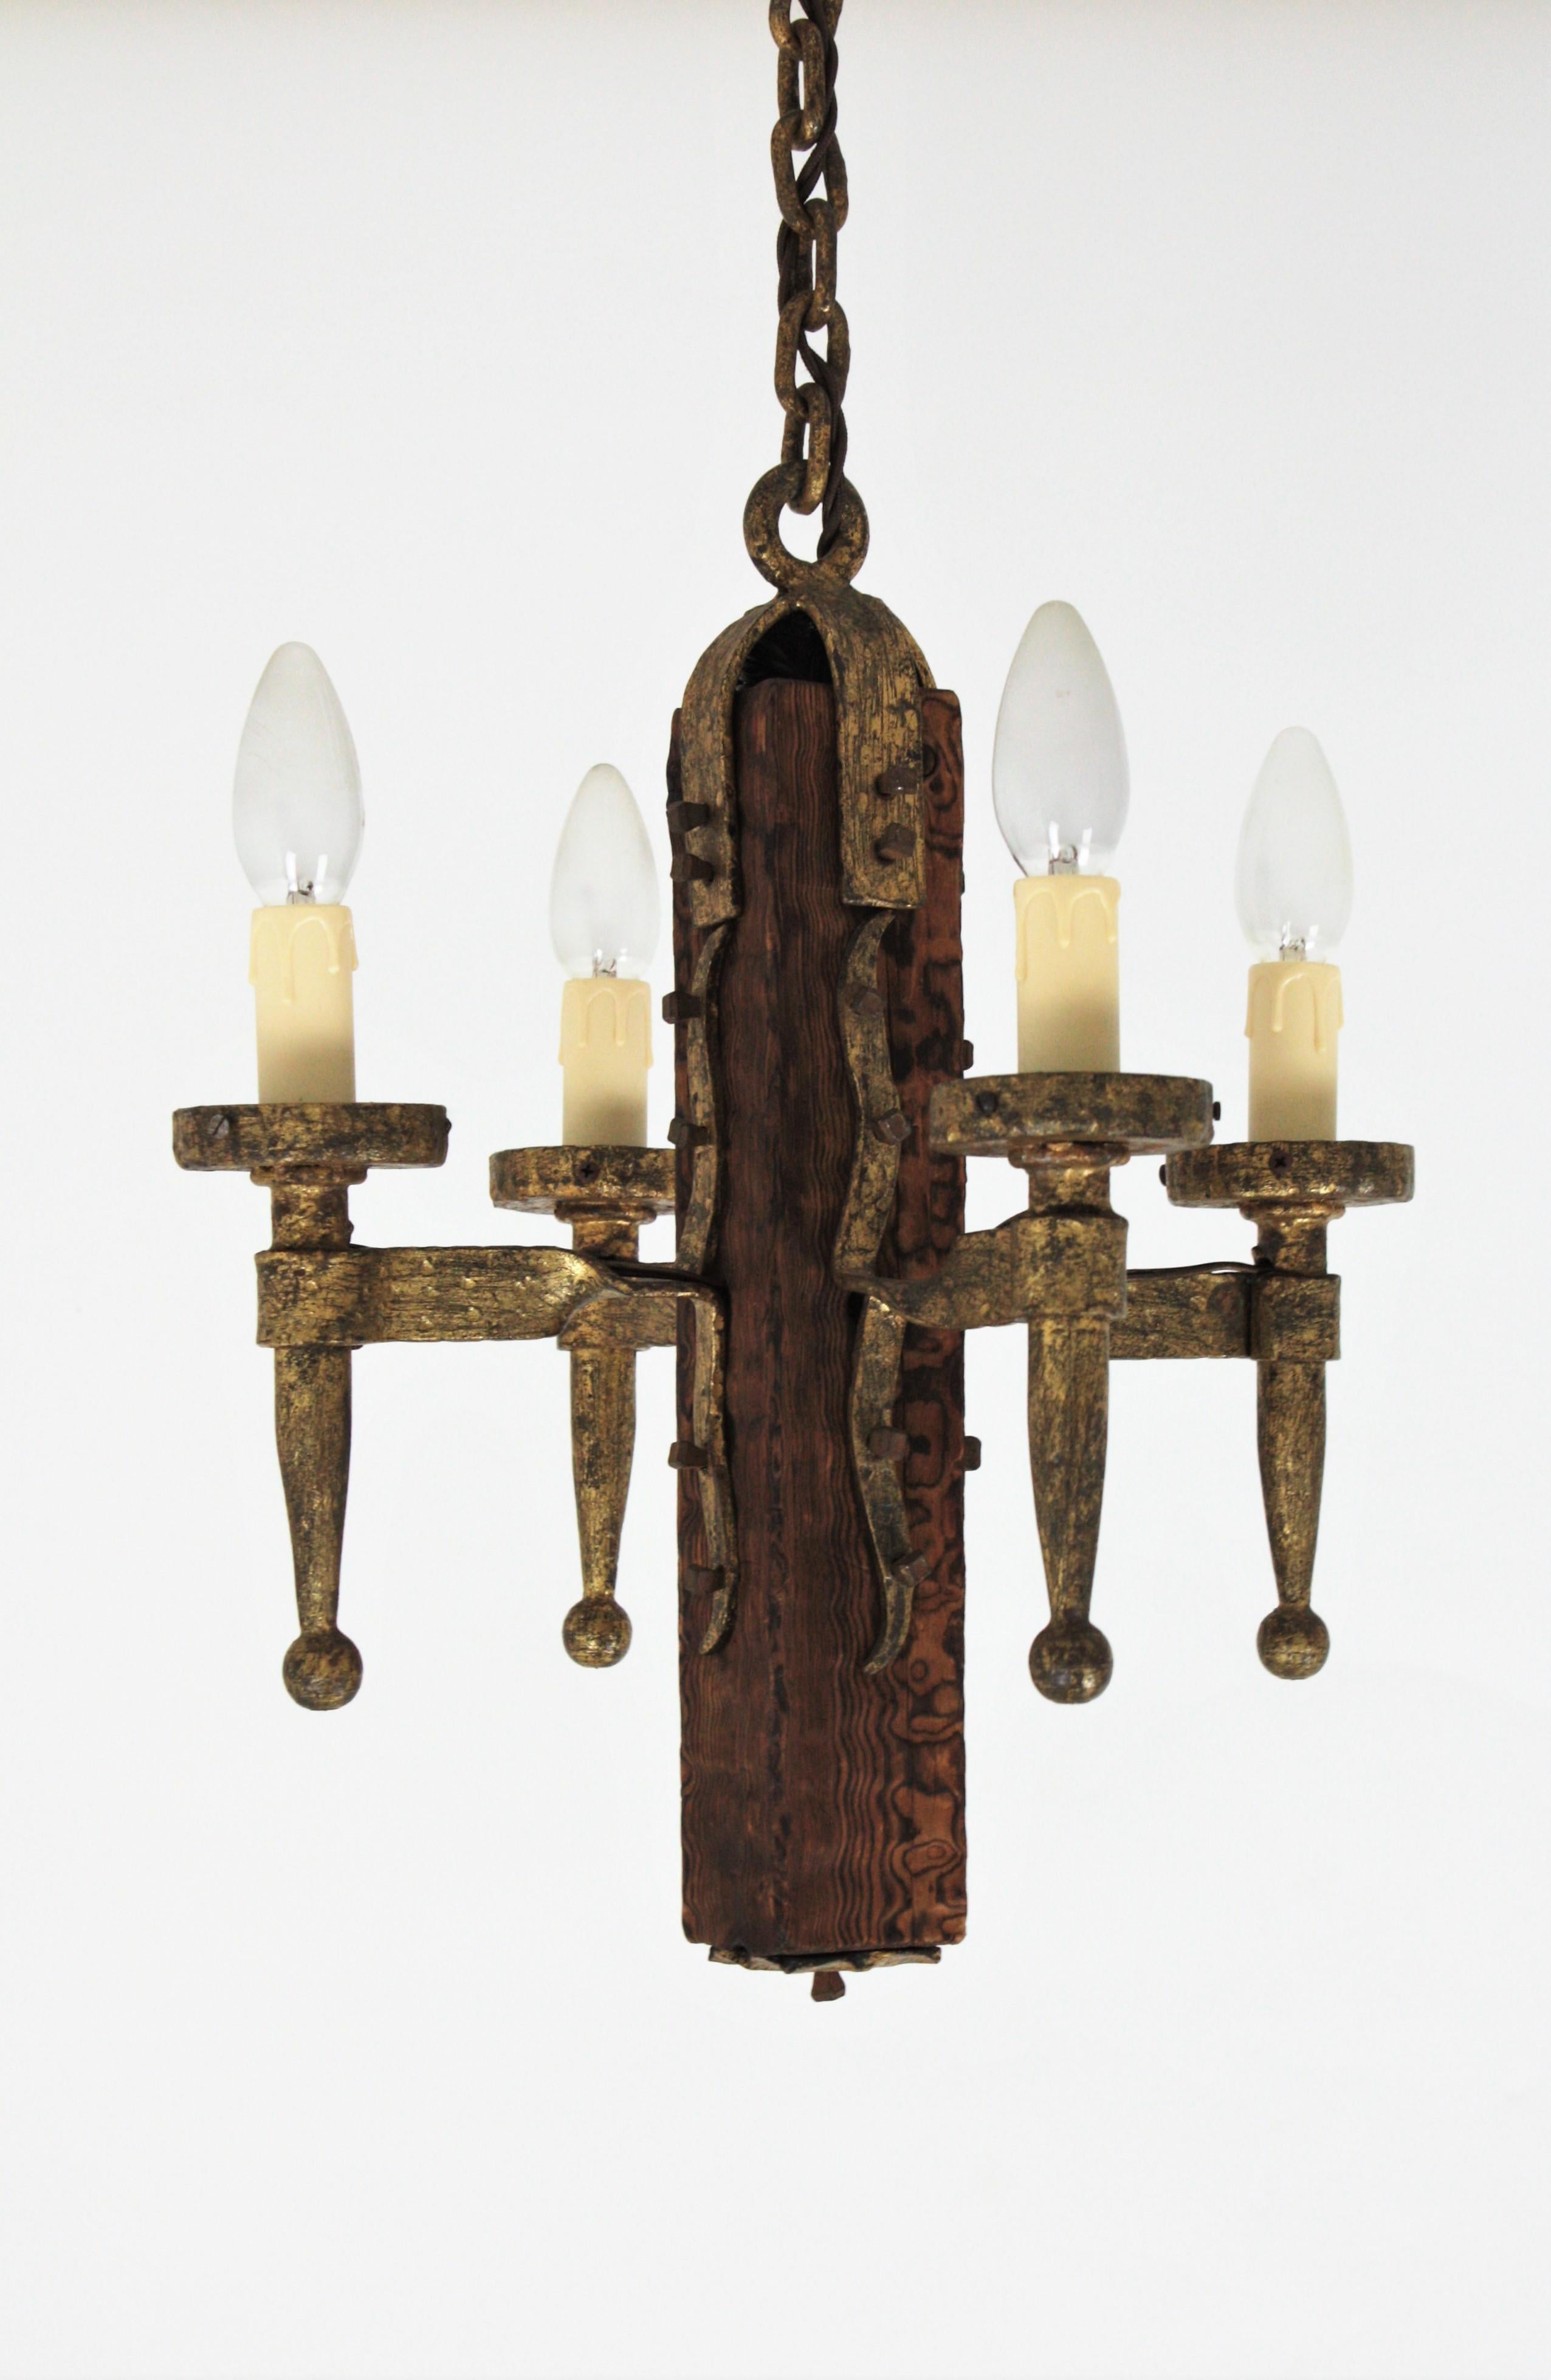 Hand forged iron and wood four-light torch pendant or ceiling hanging light, Spain, 1920s-1930s
This beautiful lamp features a rectangular wooden primitive base holding one wrought iron torch shaped arm on each side. The rectangle hangs from a